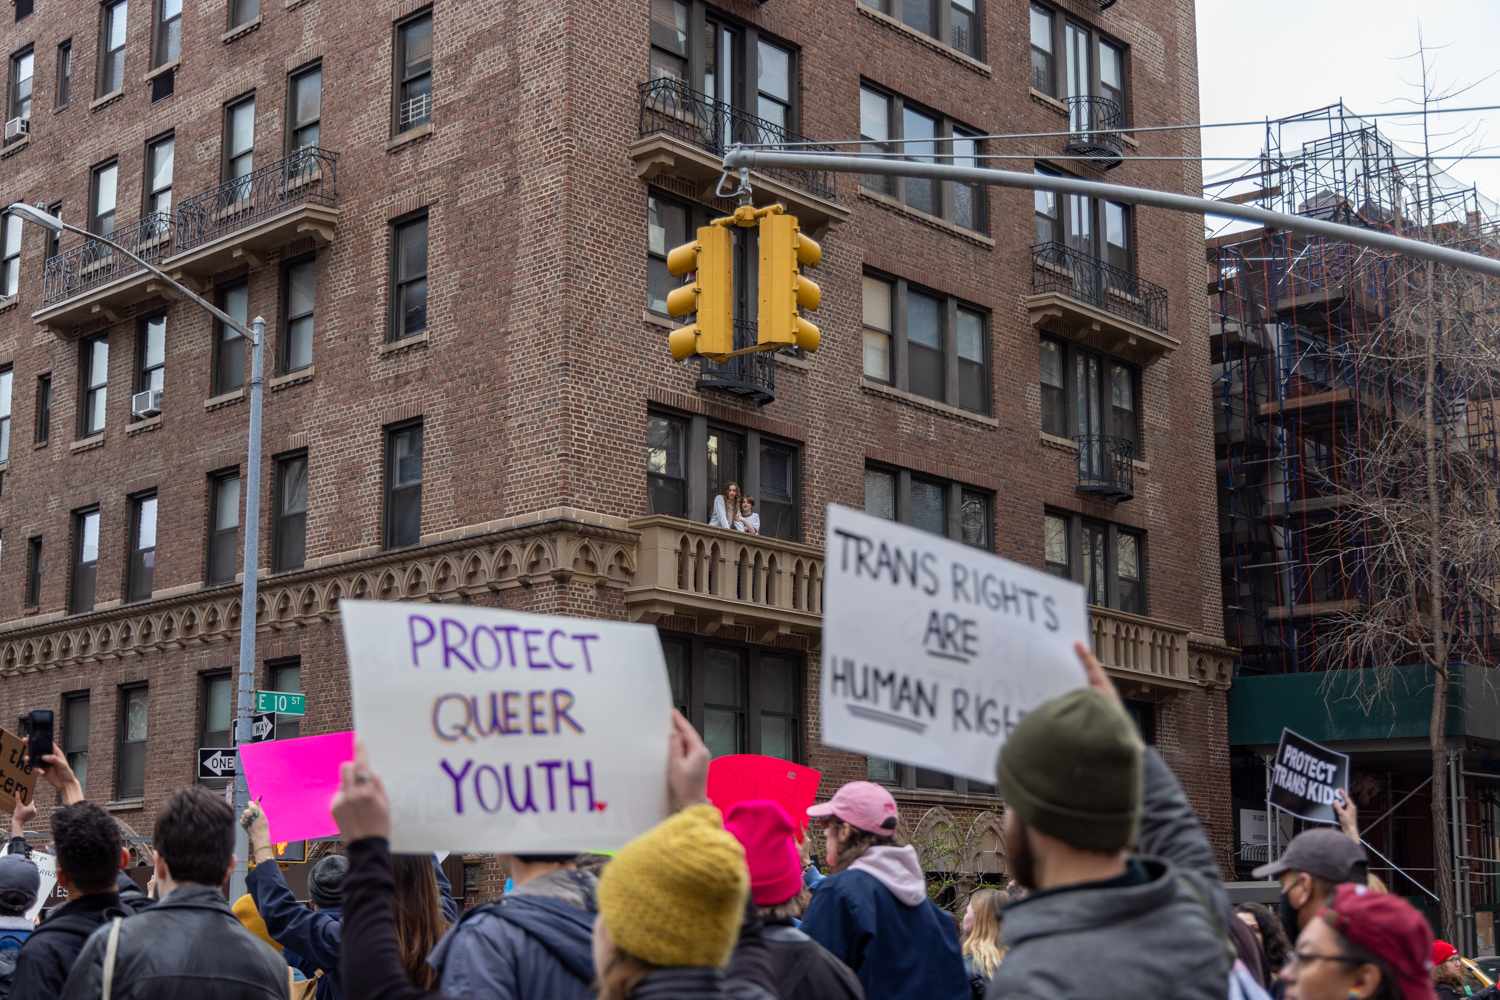 Signs that read “Protect Queer Youth,” and “Trans Rights are Human Rights” held up in front of a brown apartment building with two people looking out on a balcony.